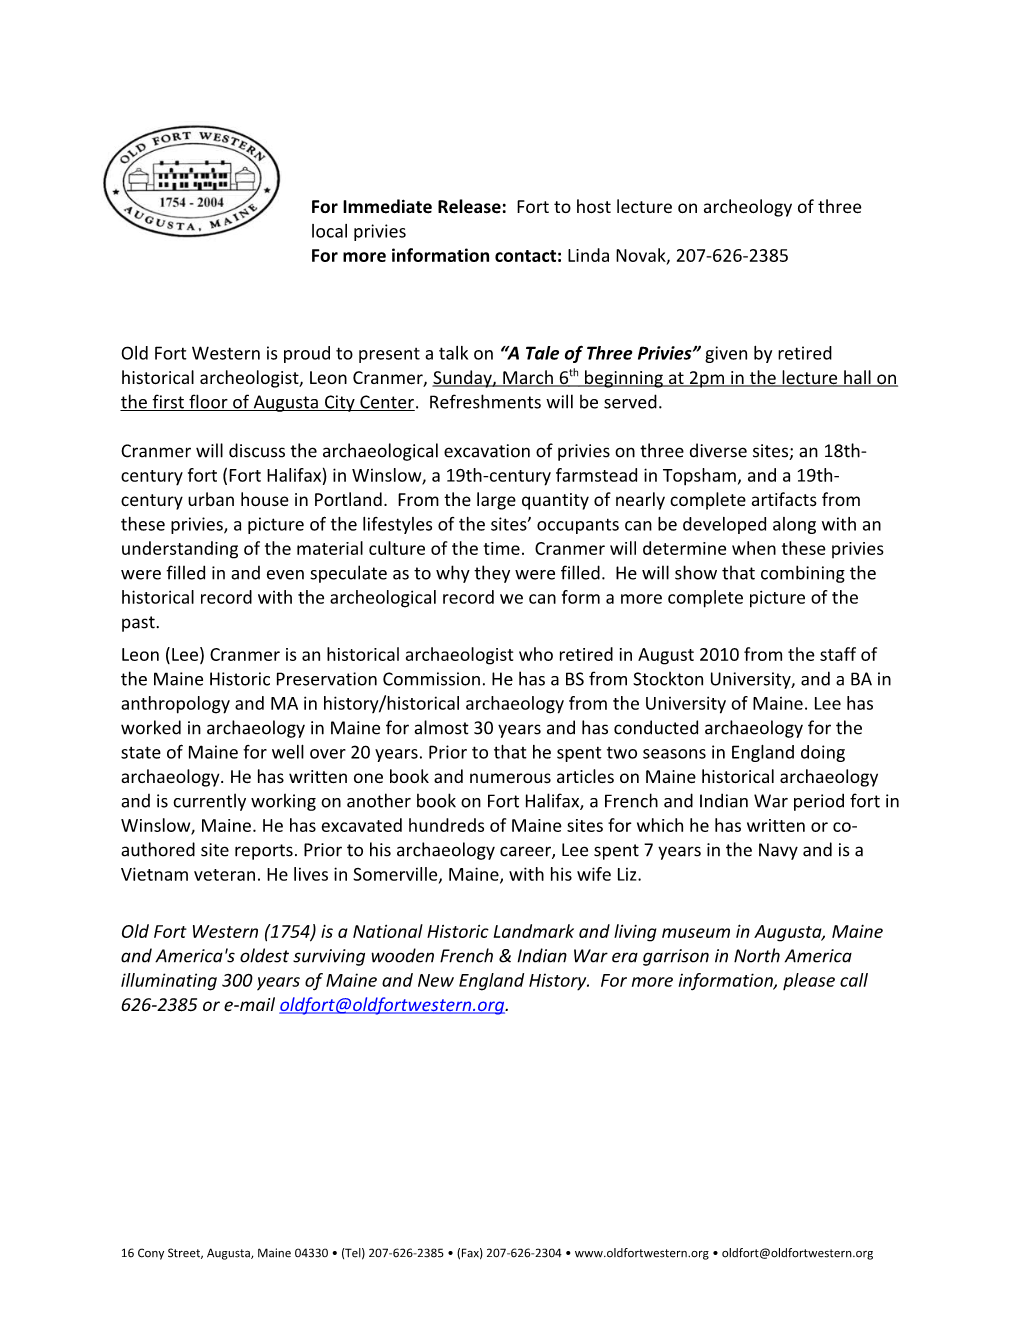 For Immediate Release: Fort to Host Lecture on Archeology of Three Local Privies